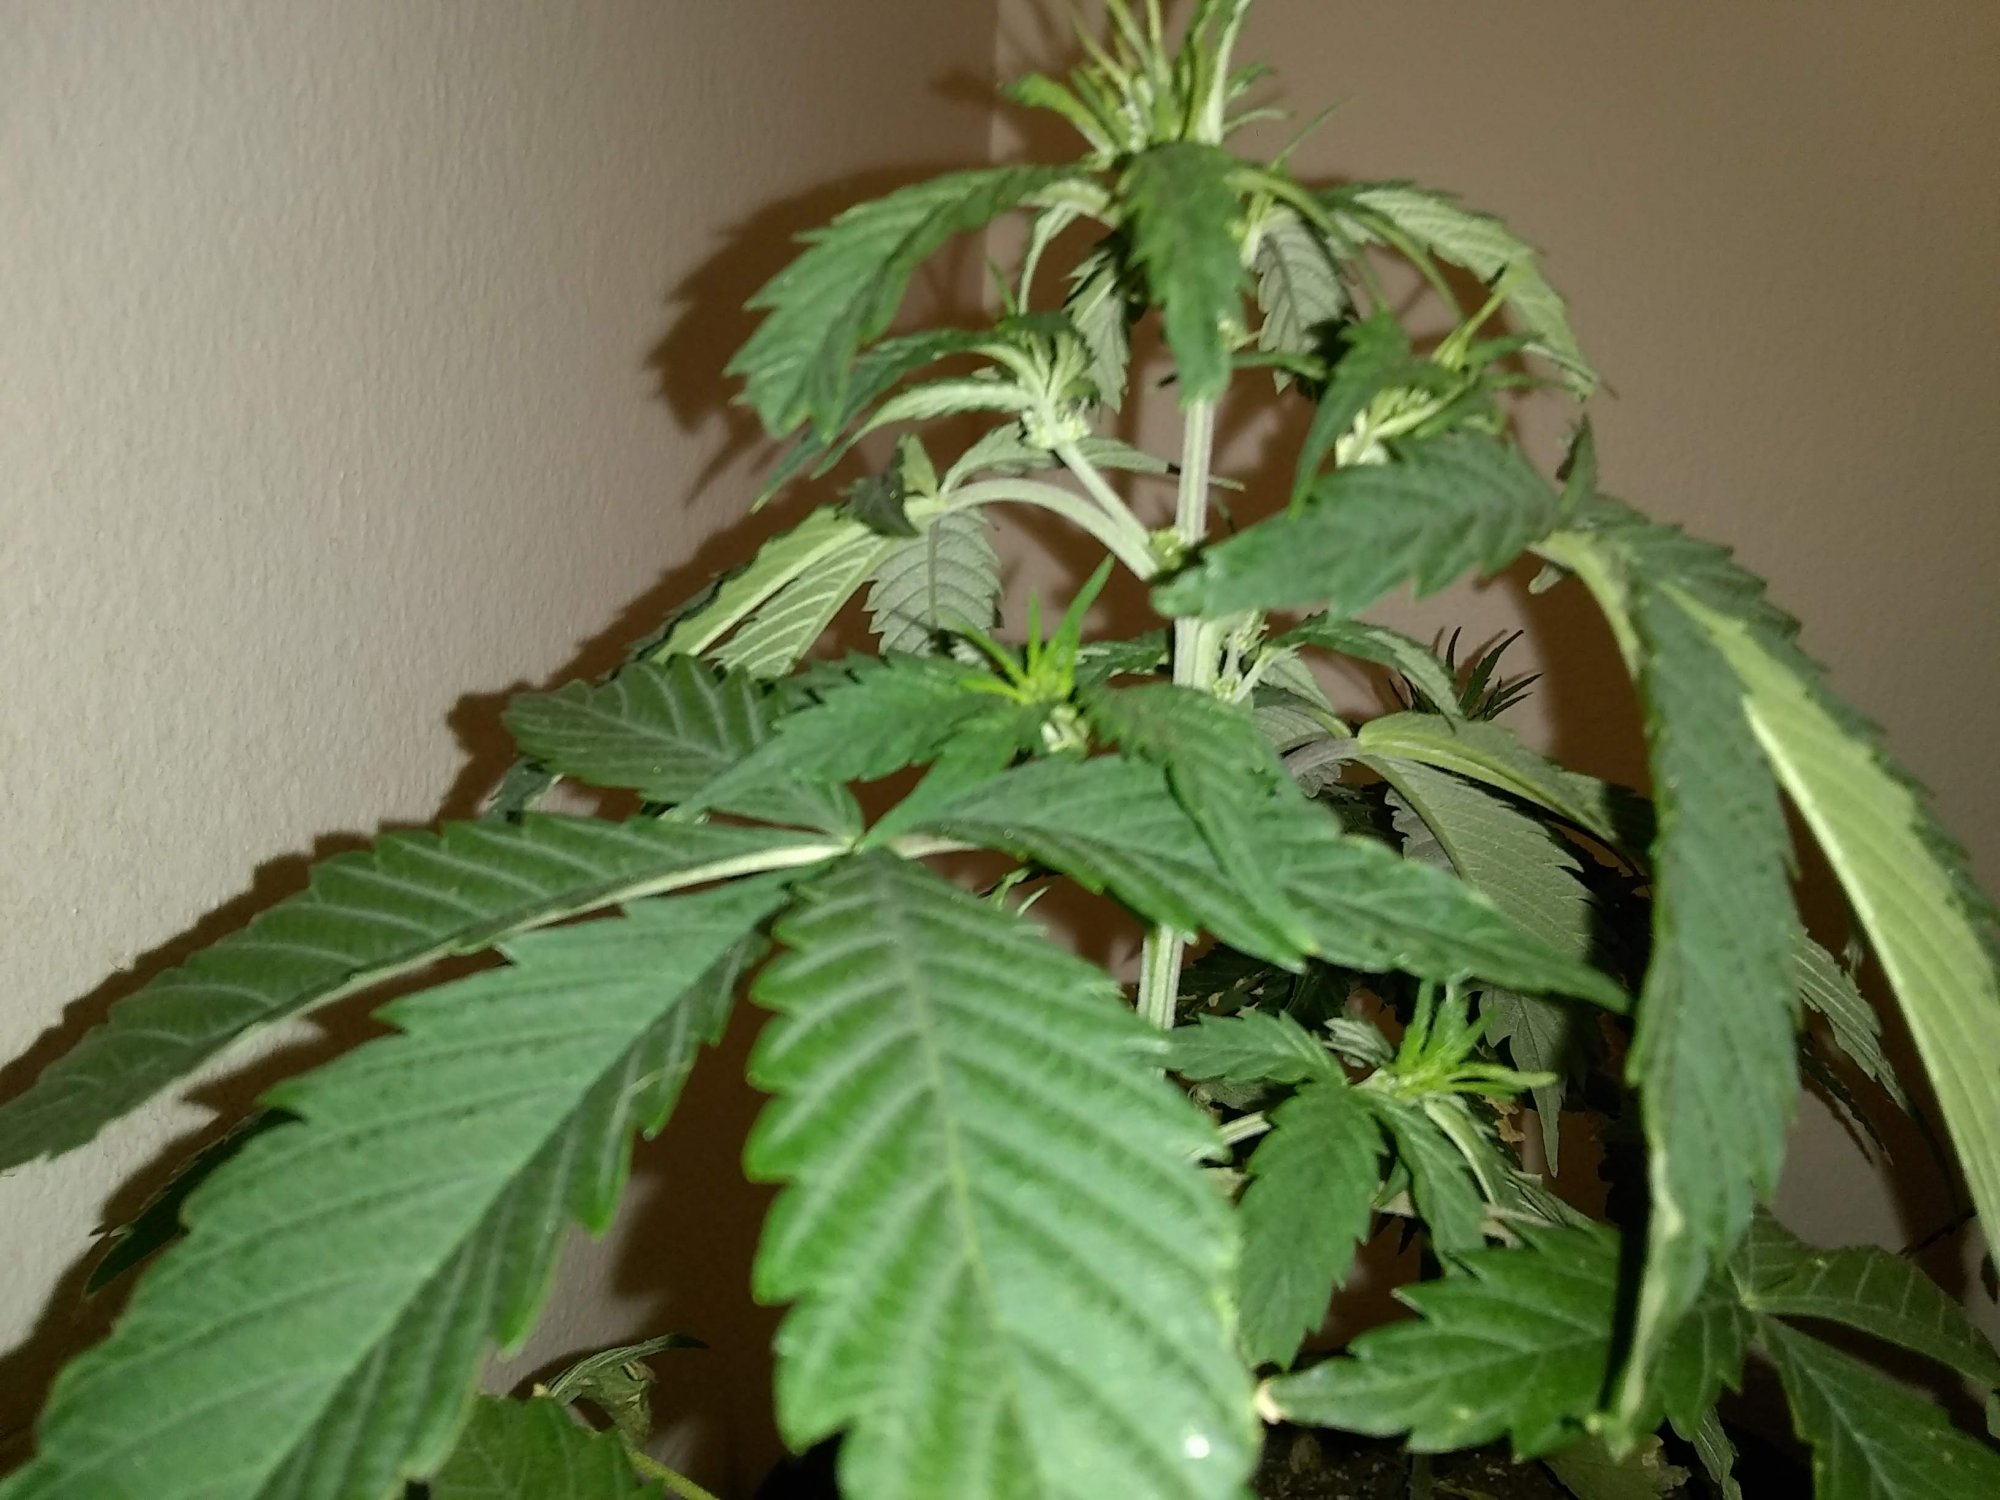 New flowering cycle  hows my inter nodal spacing 16